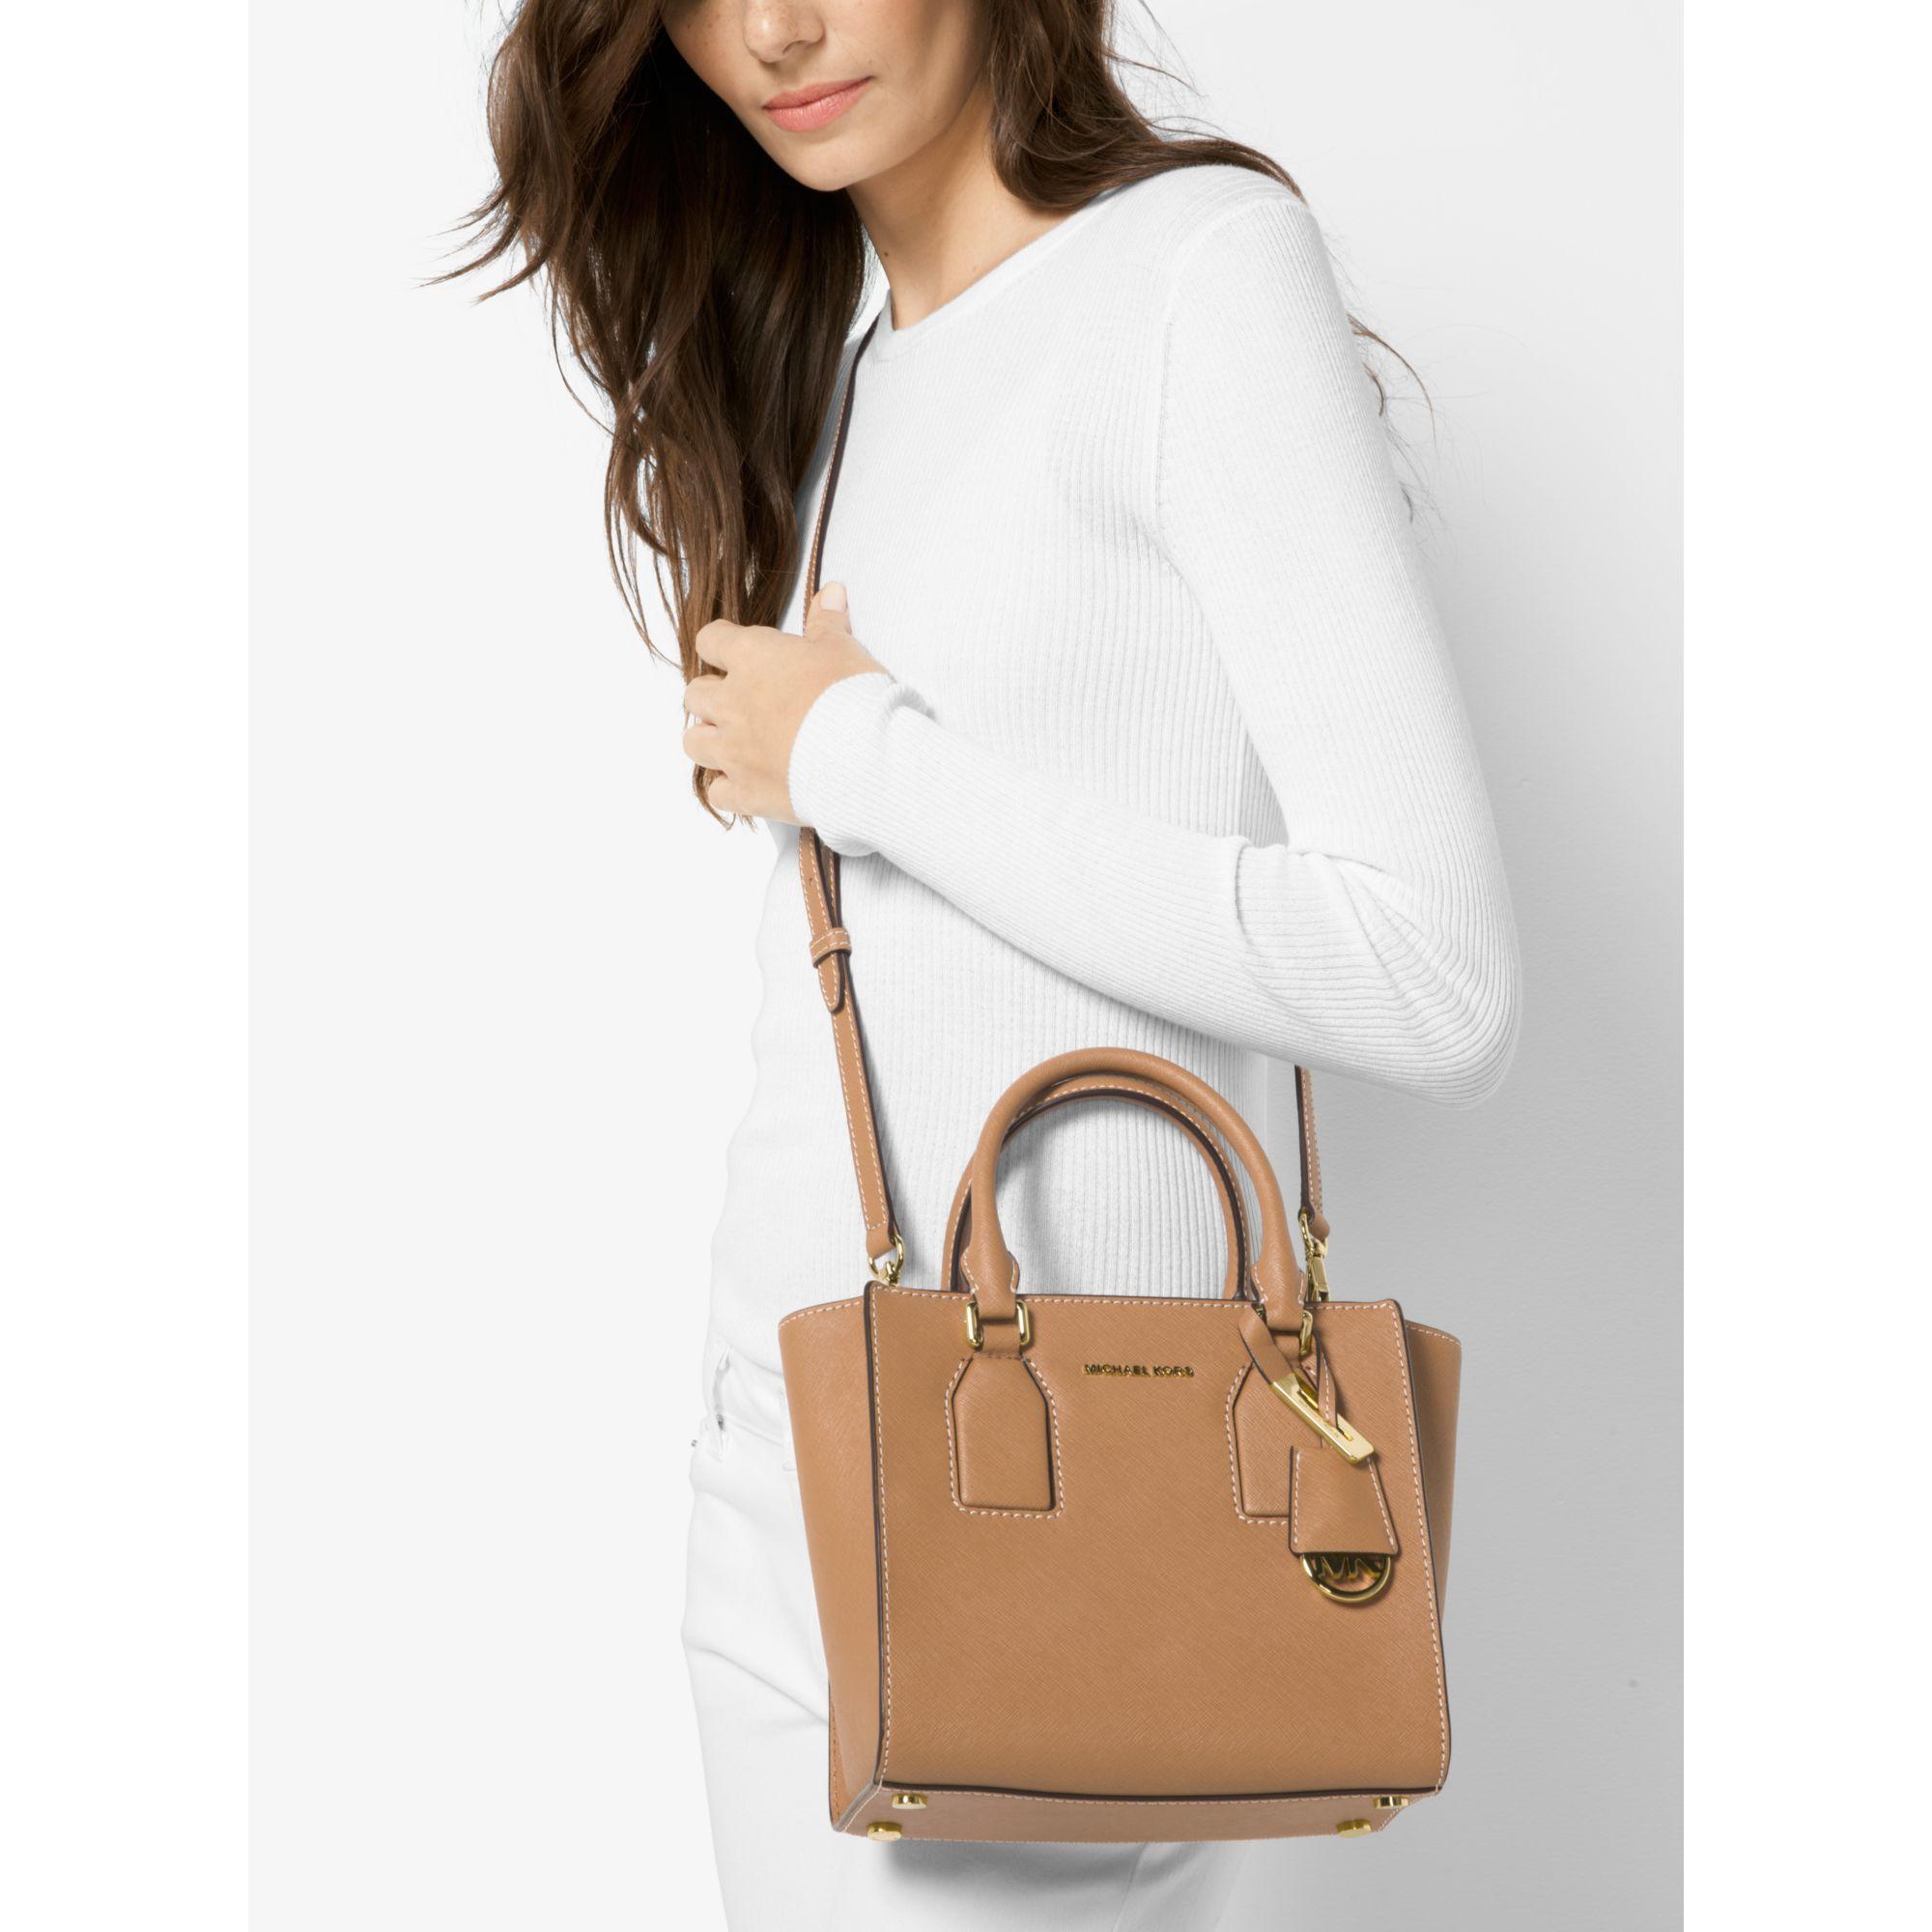 selby saffiano leather messenger